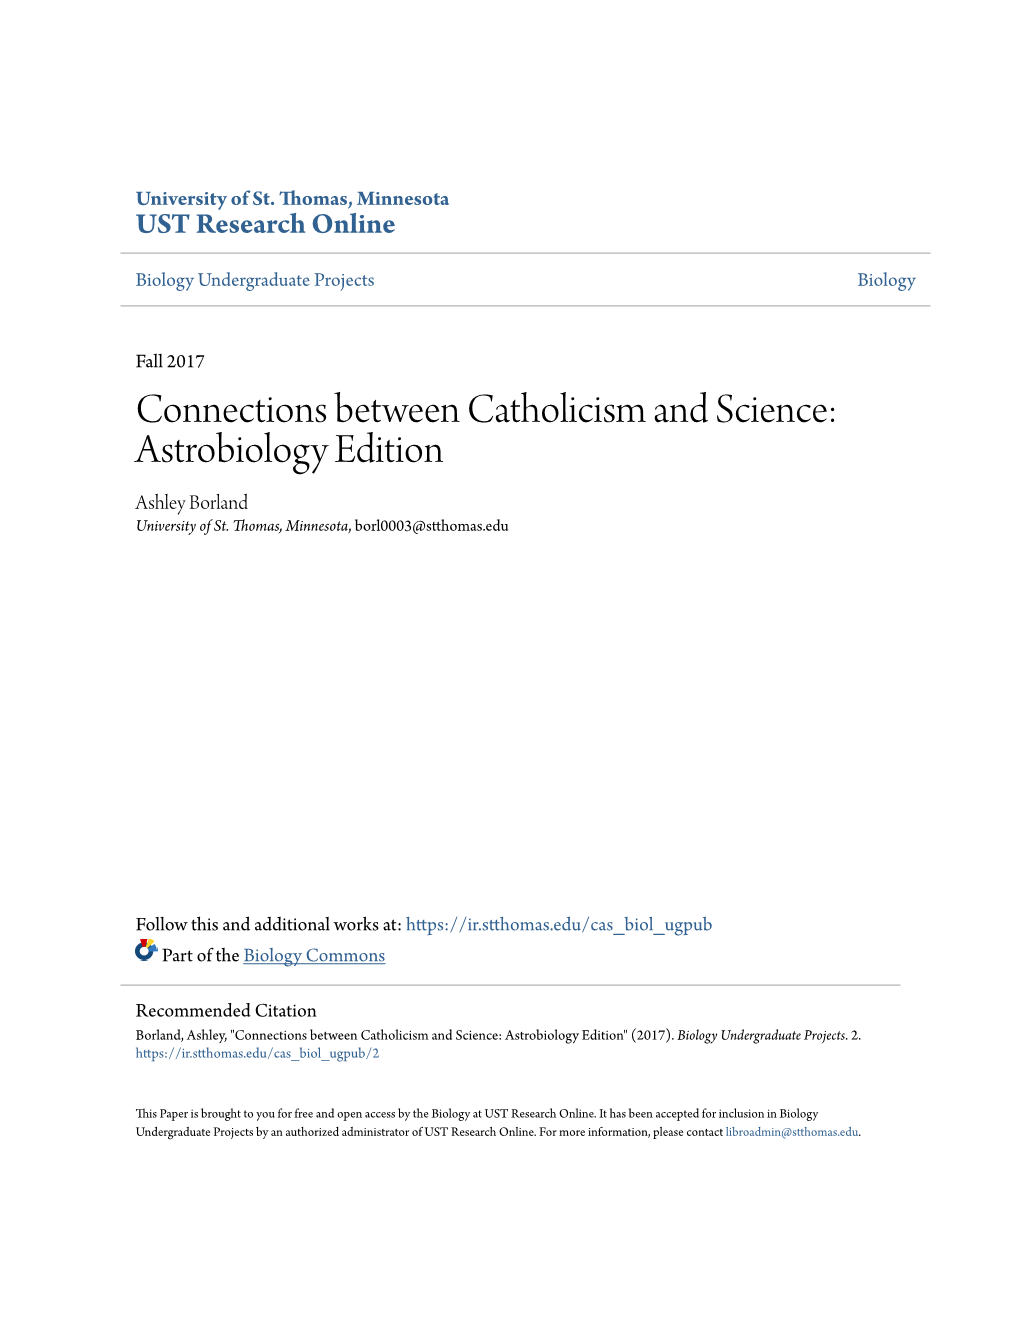 Connections Between Catholicism and Science: Astrobiology Edition Ashley Borland University of St